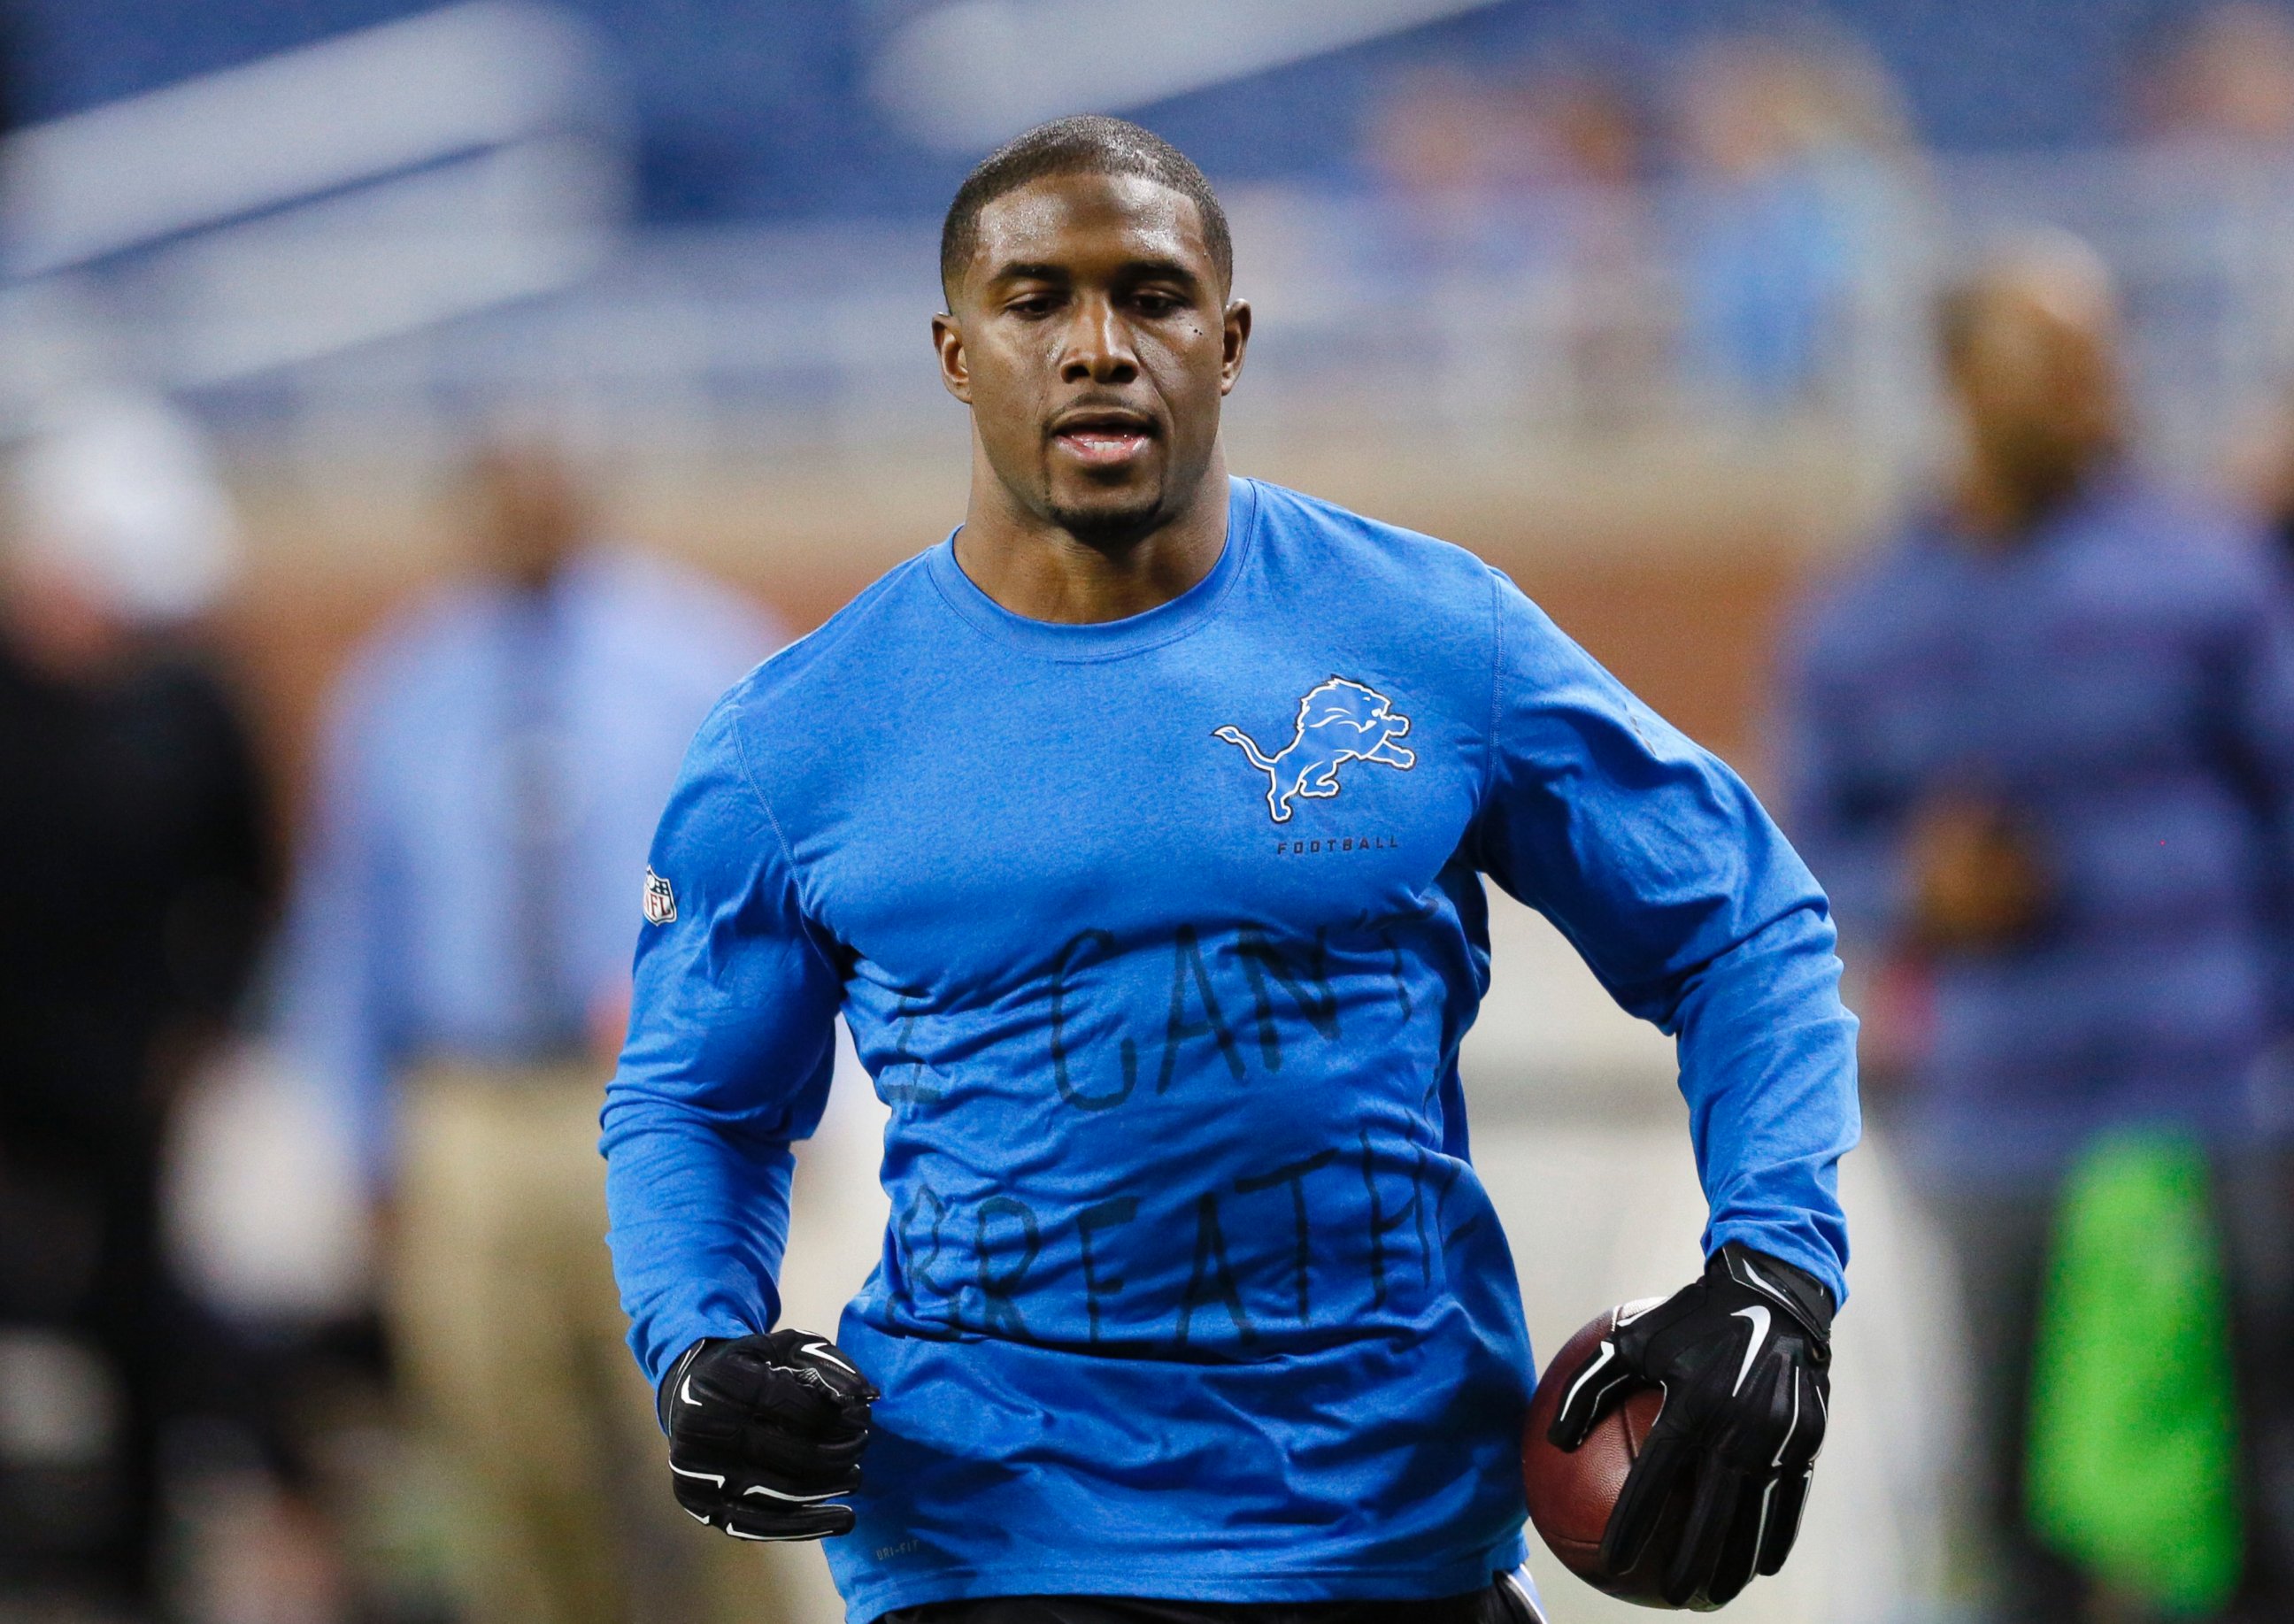 PHOTO: Wearing a Detroit Lions shirt with "I can't breathe" written on the front, running back Reggie Bush runs through pre-game warmups in an NFL football game against the Tampa Bay Buccaneers in Detroit, Dec. 7, 2014.